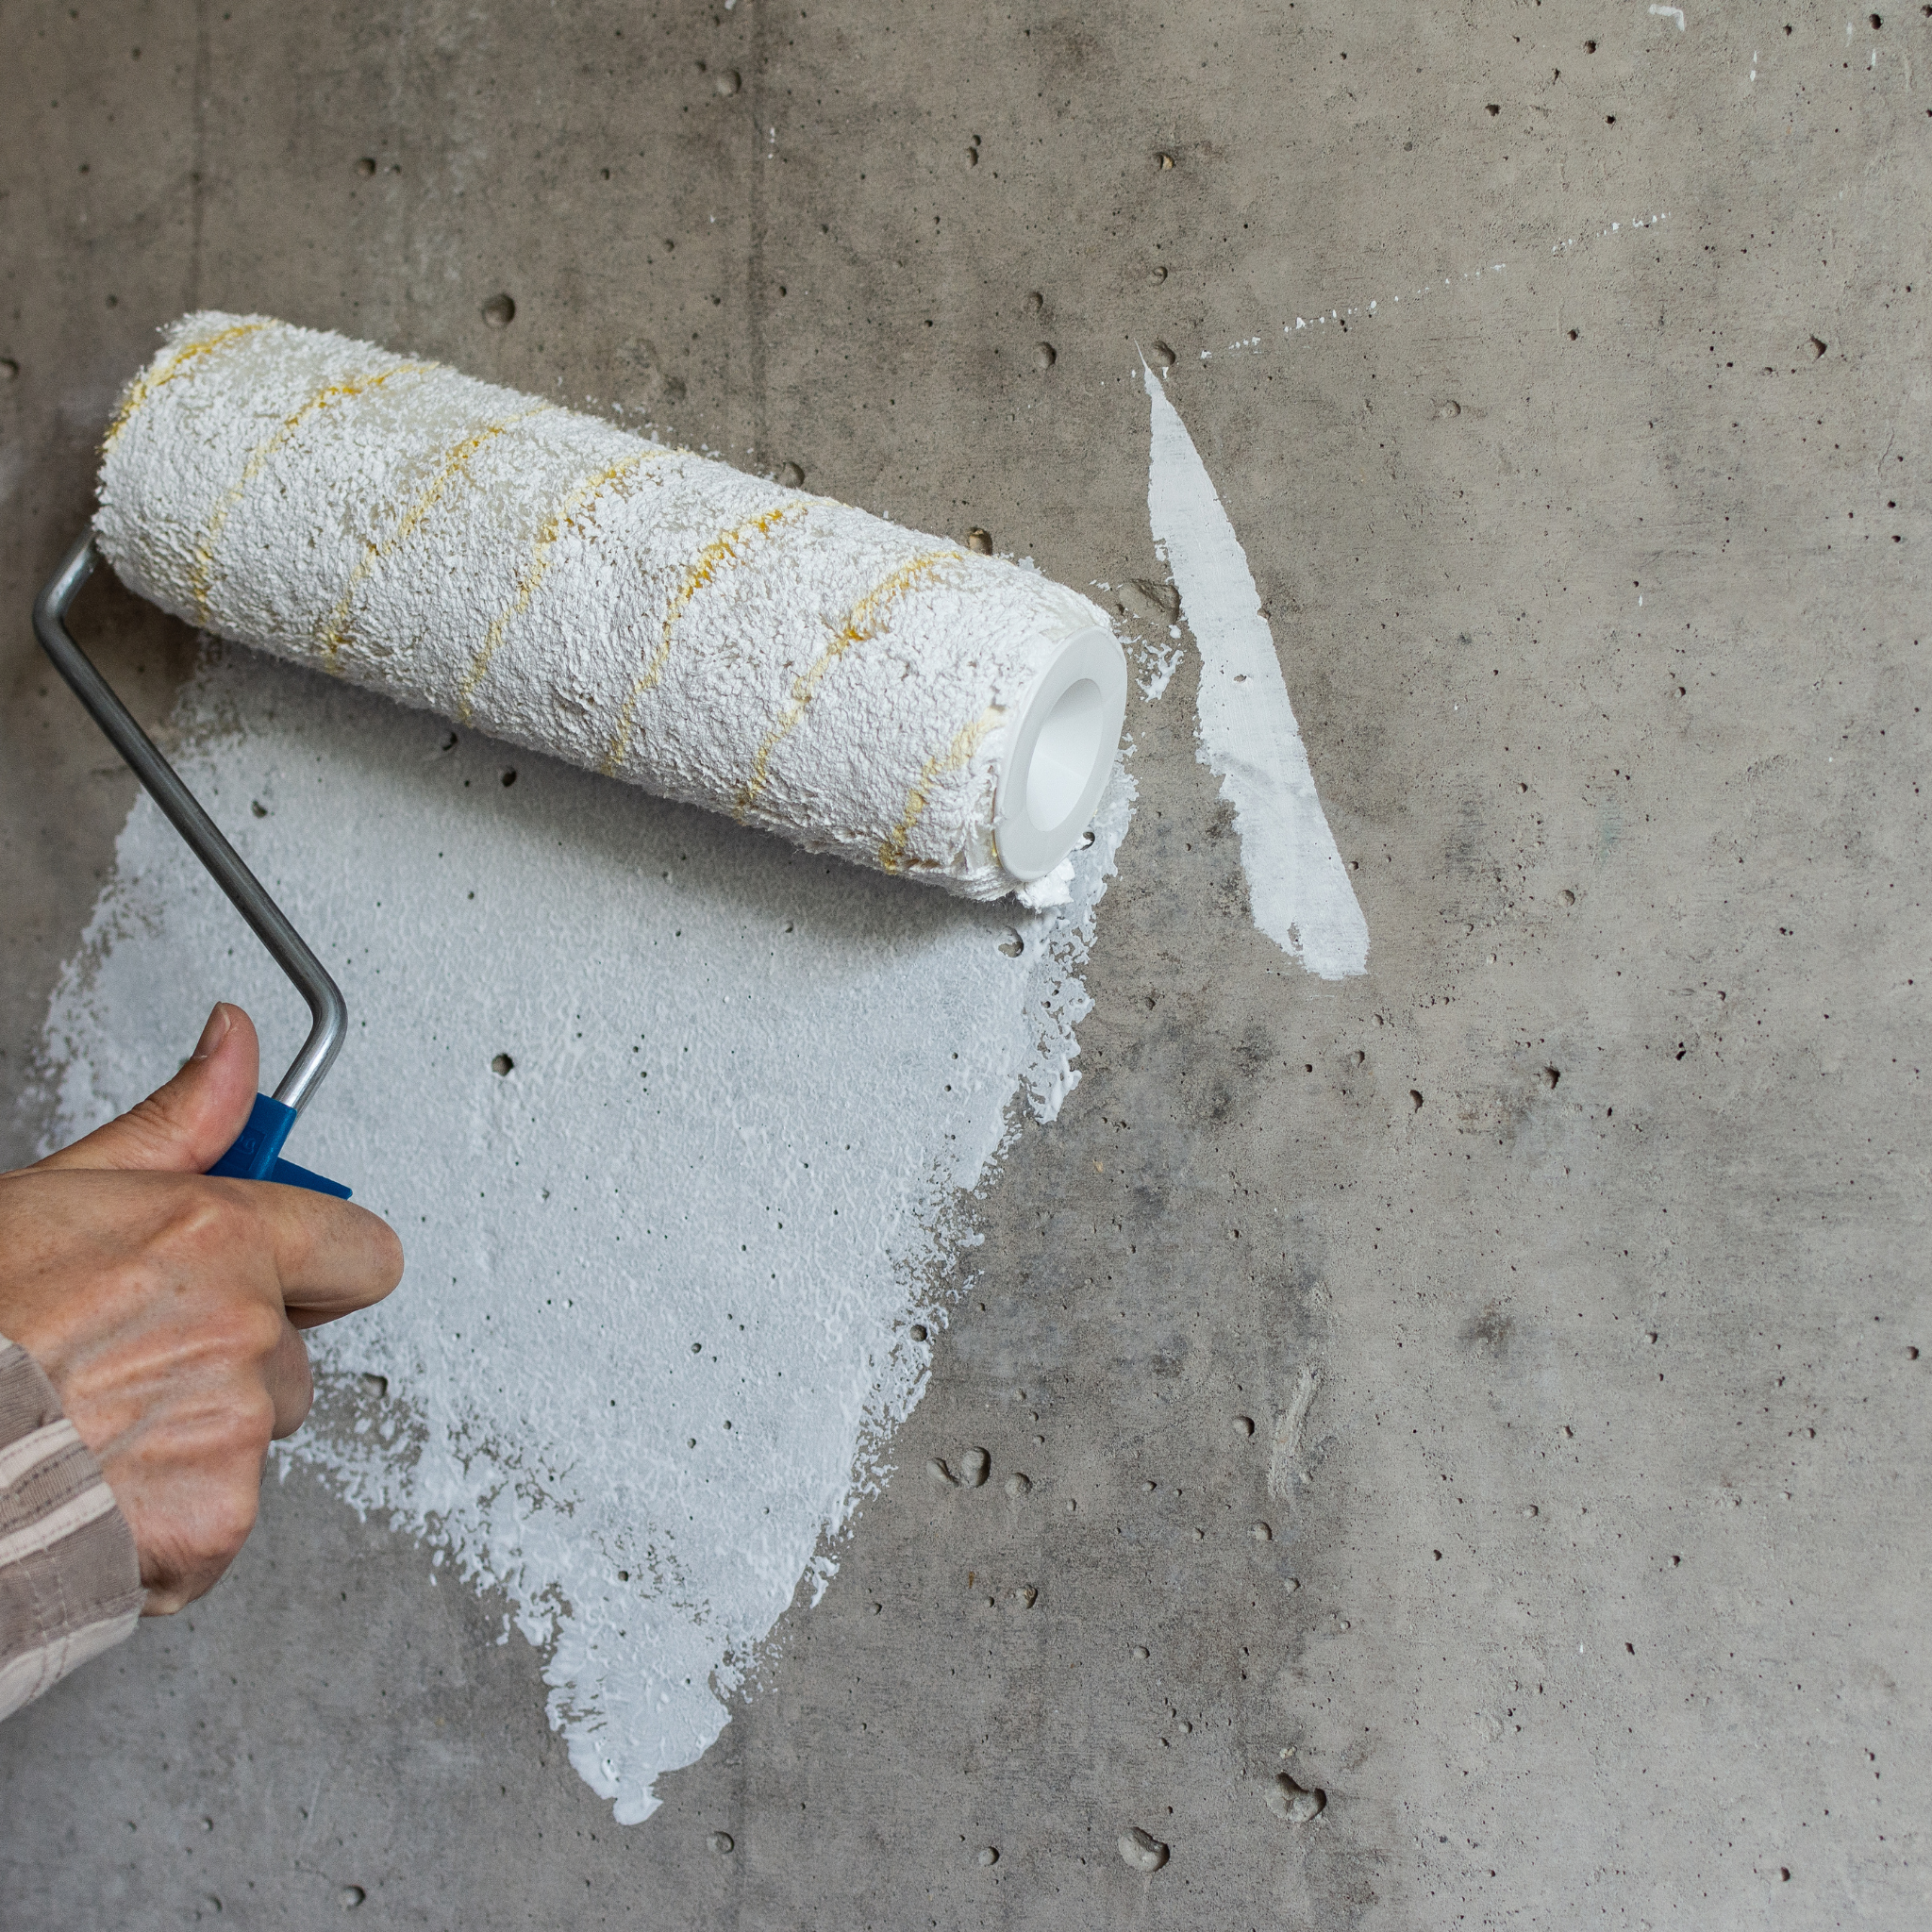 Painting concrete walls and floors